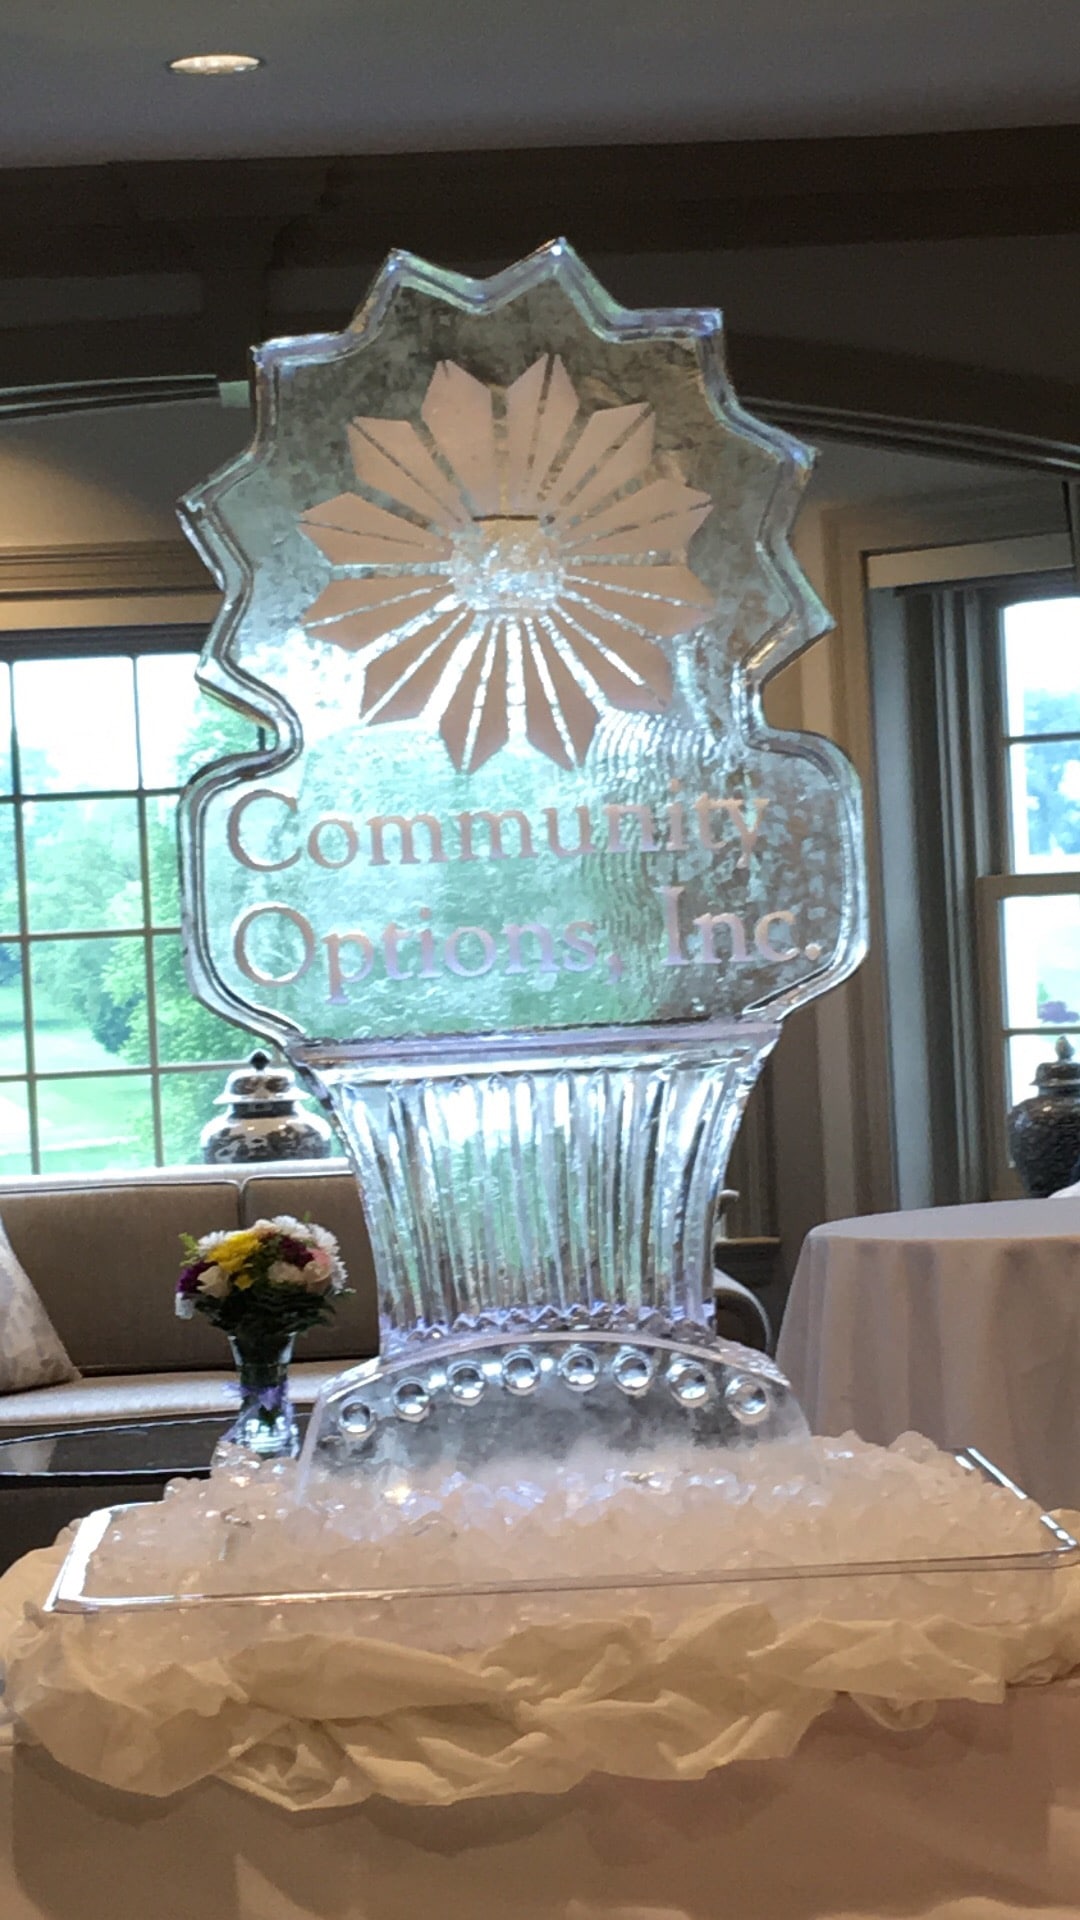 May 22, 2017 Community Options, Inc. Spring Golf Classic at Torresdale